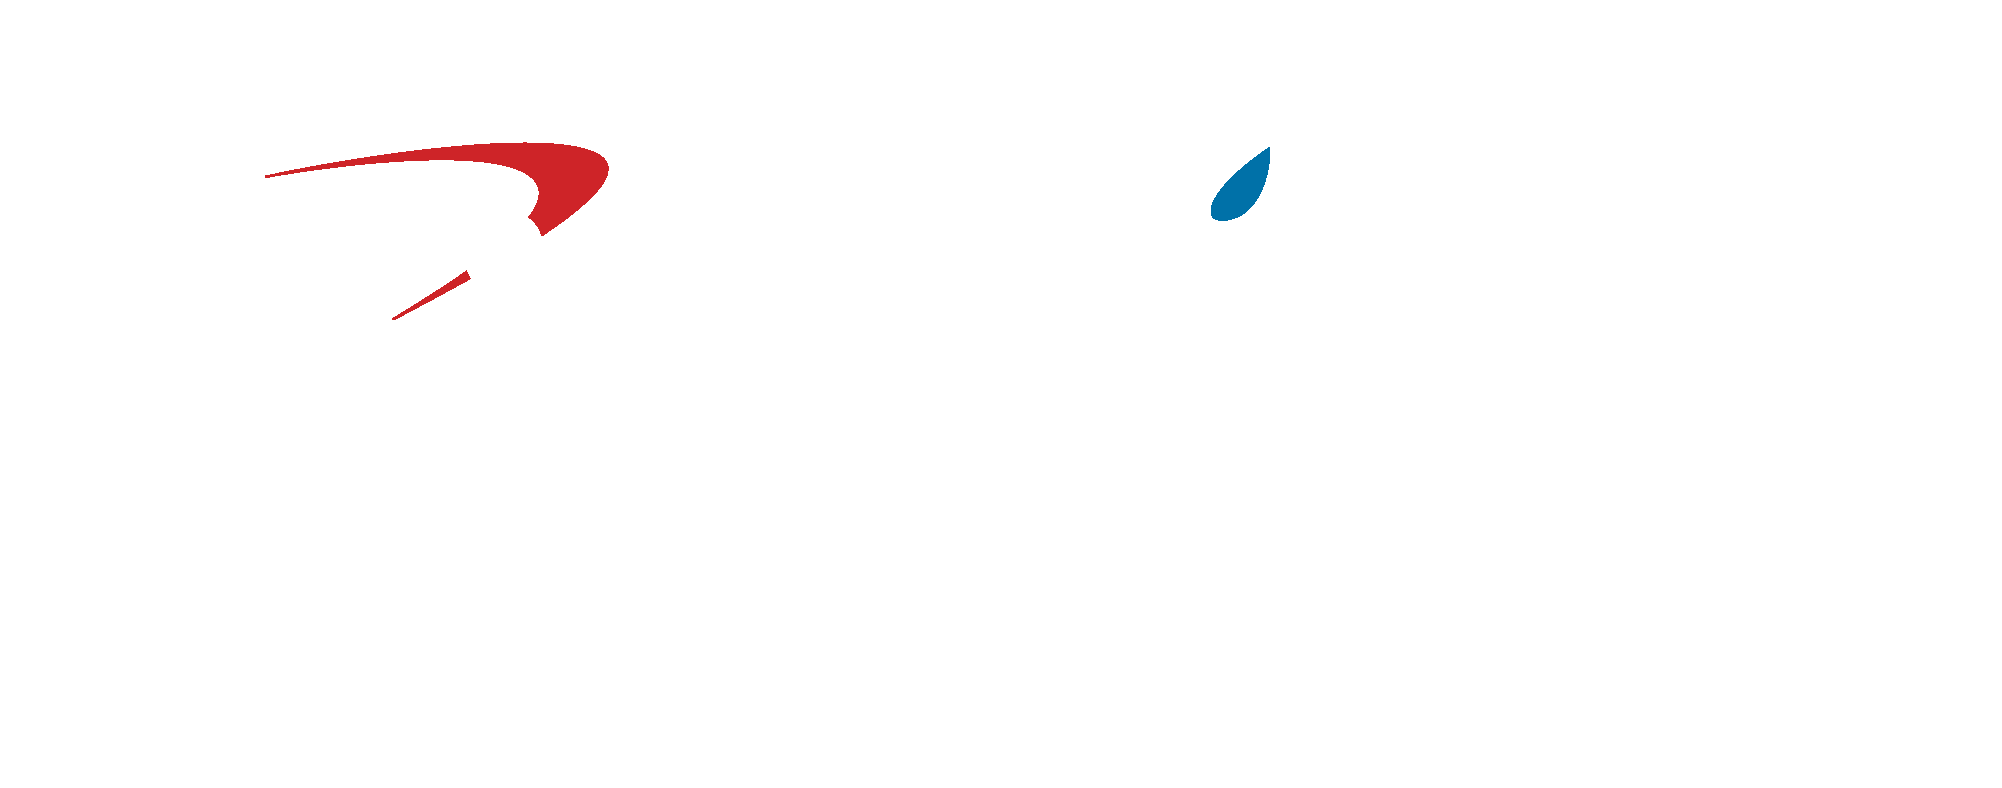 Capital One City Parks Foundation SummerStage logo